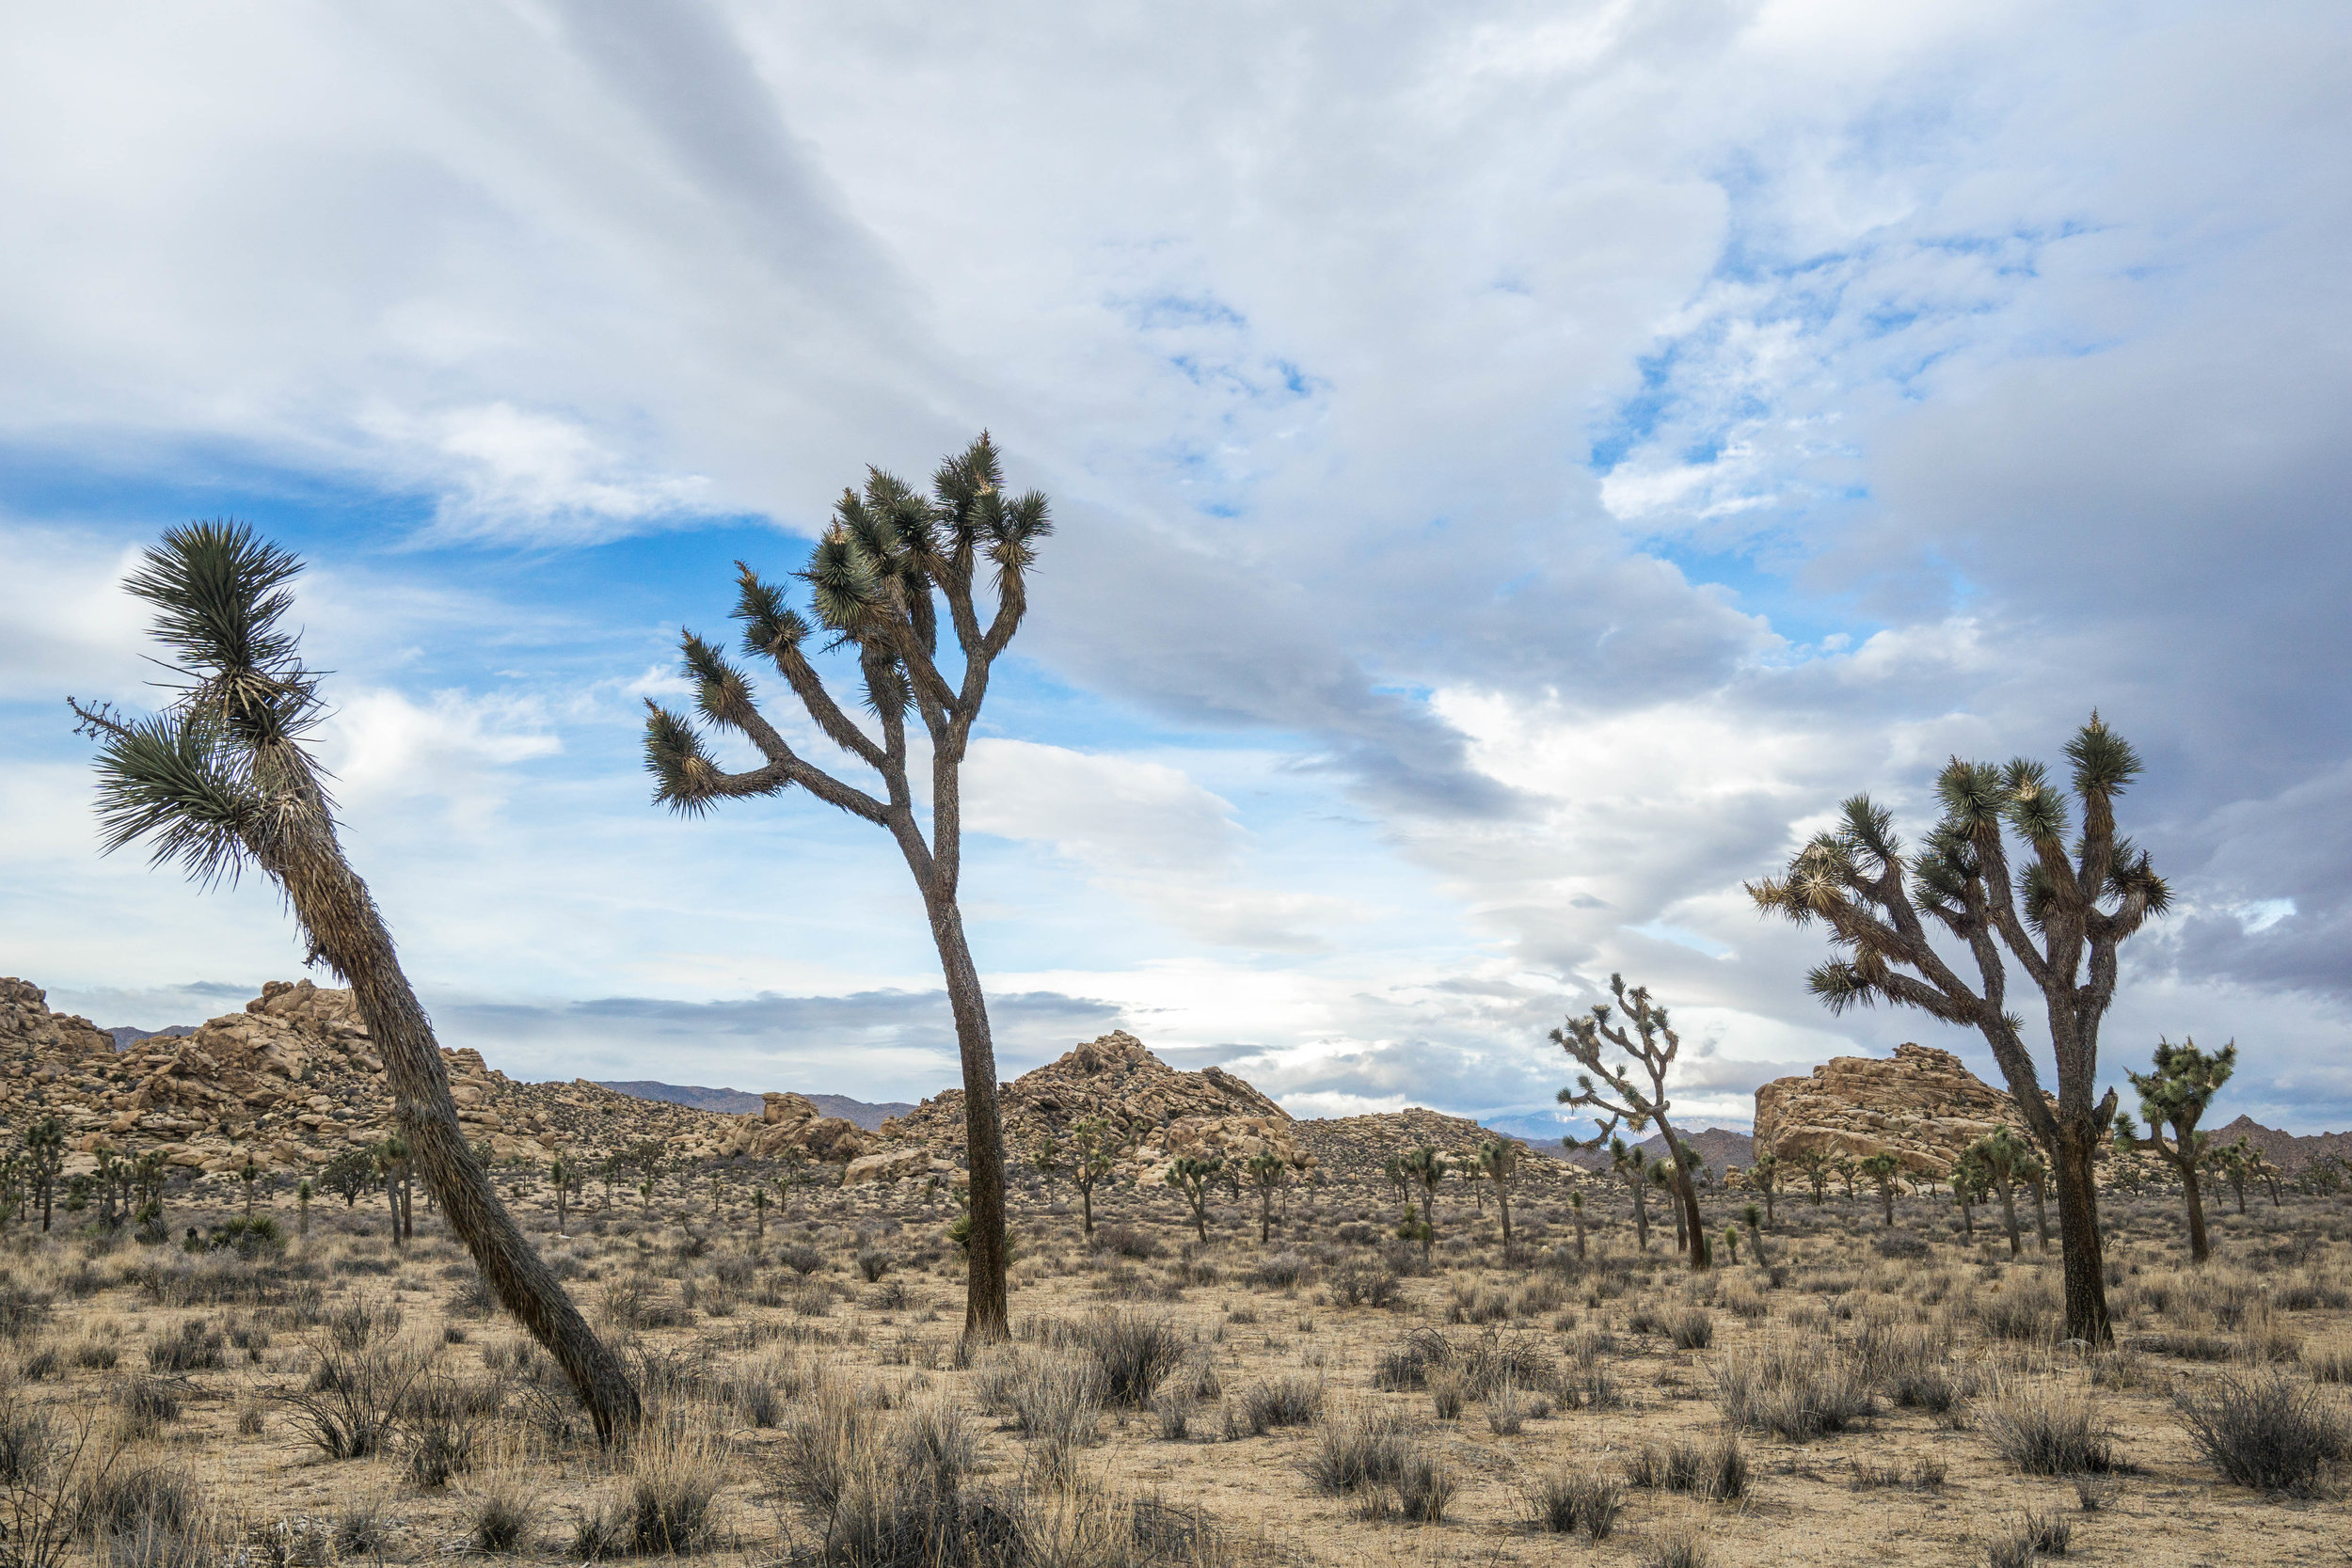 Large mature Joshua Trees with several branches are anywhere from 60 to 500 years old.